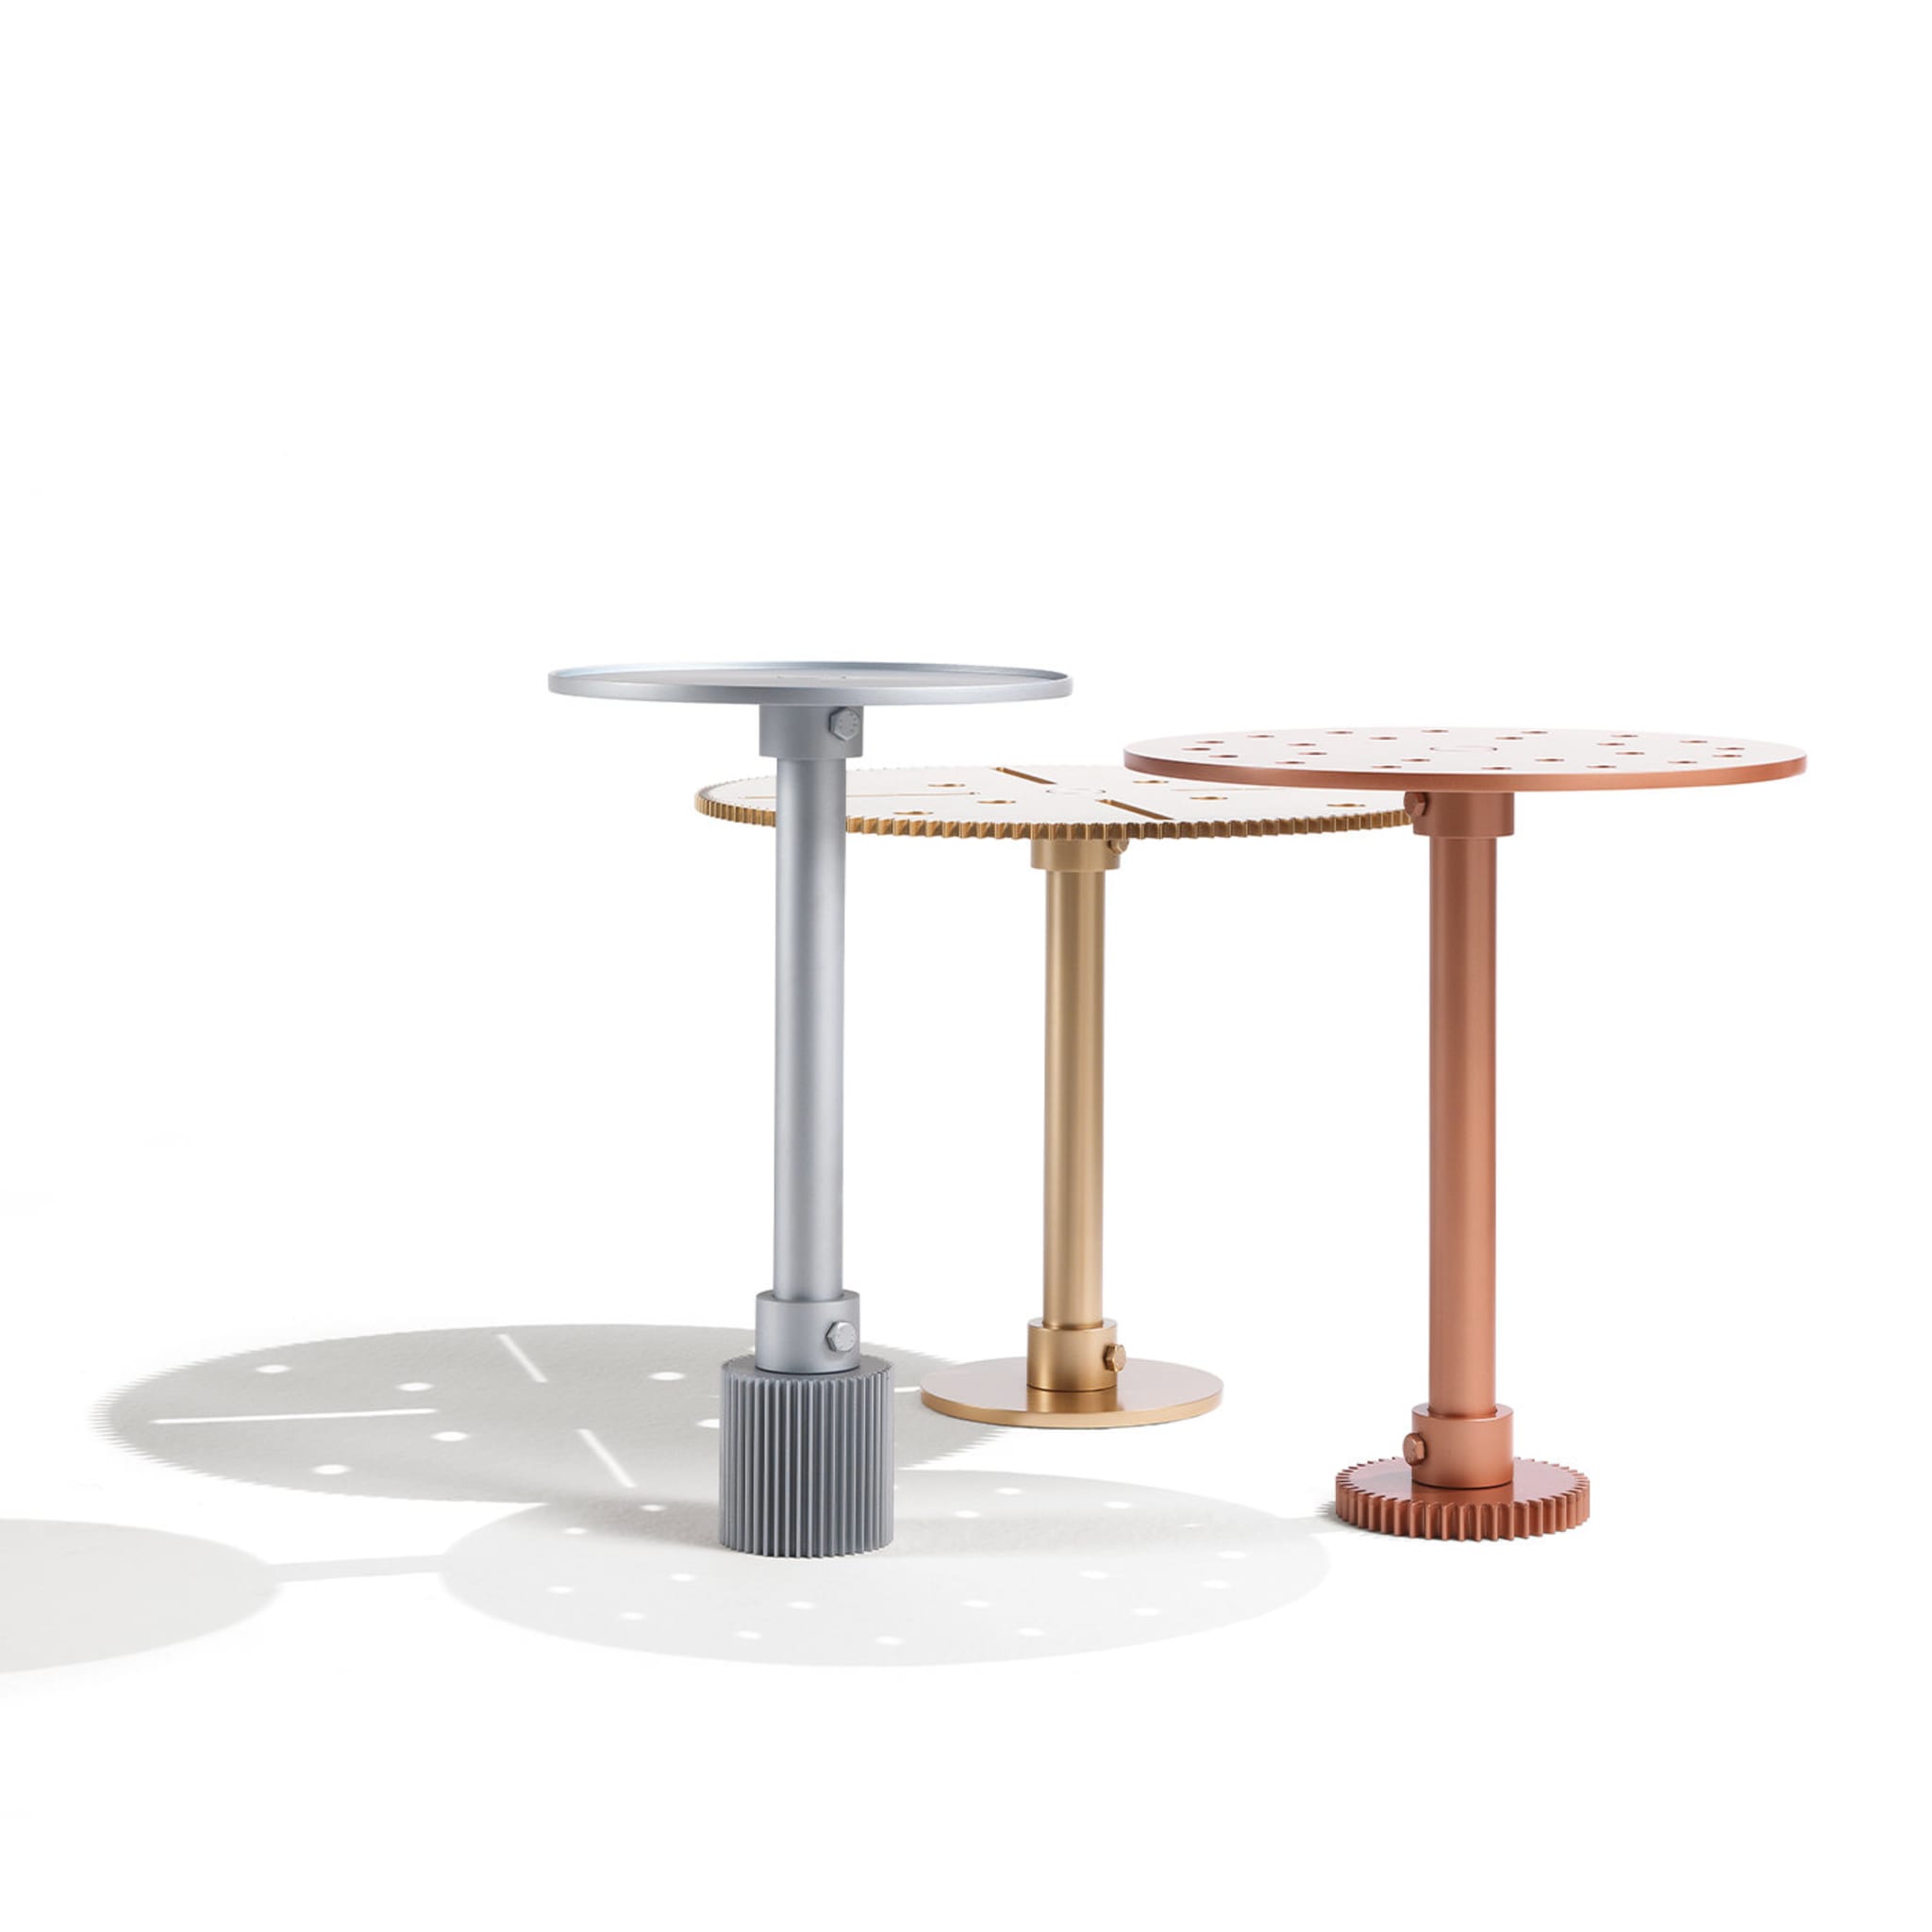 Maseen A-X Side Table by Samer Alameen - Alternative view 2